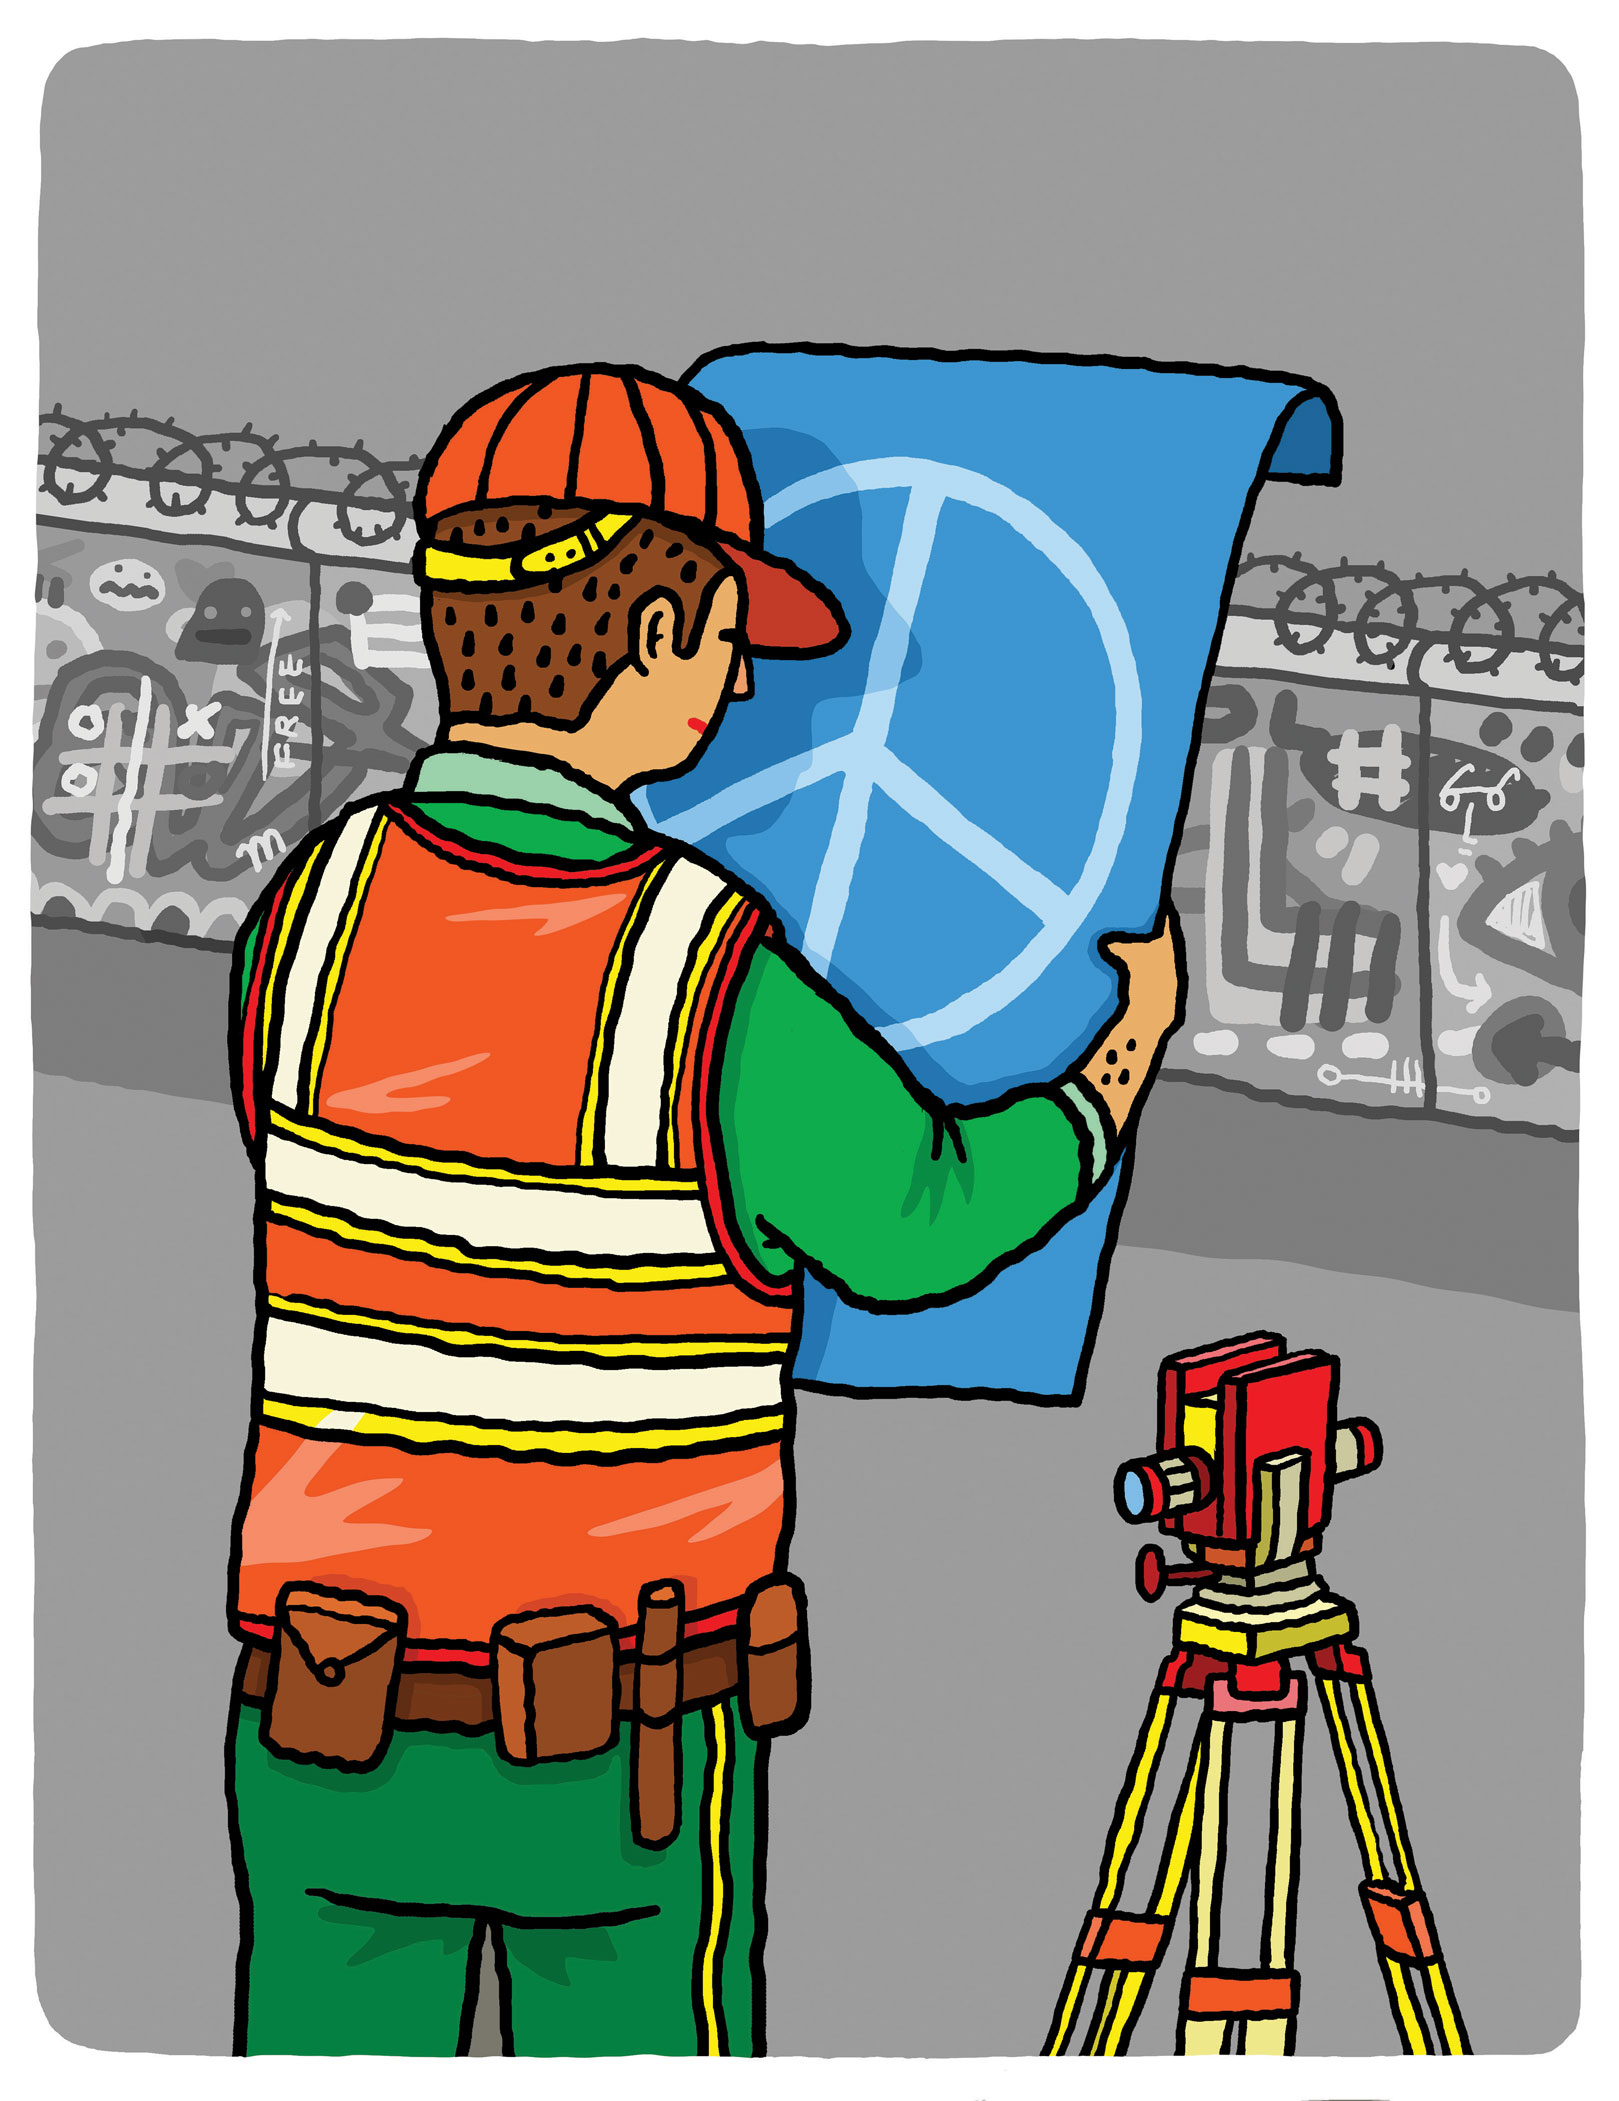 illustration of a male figure examining a blue document with a peace sign on it beside a camera, by Aaron Meshon